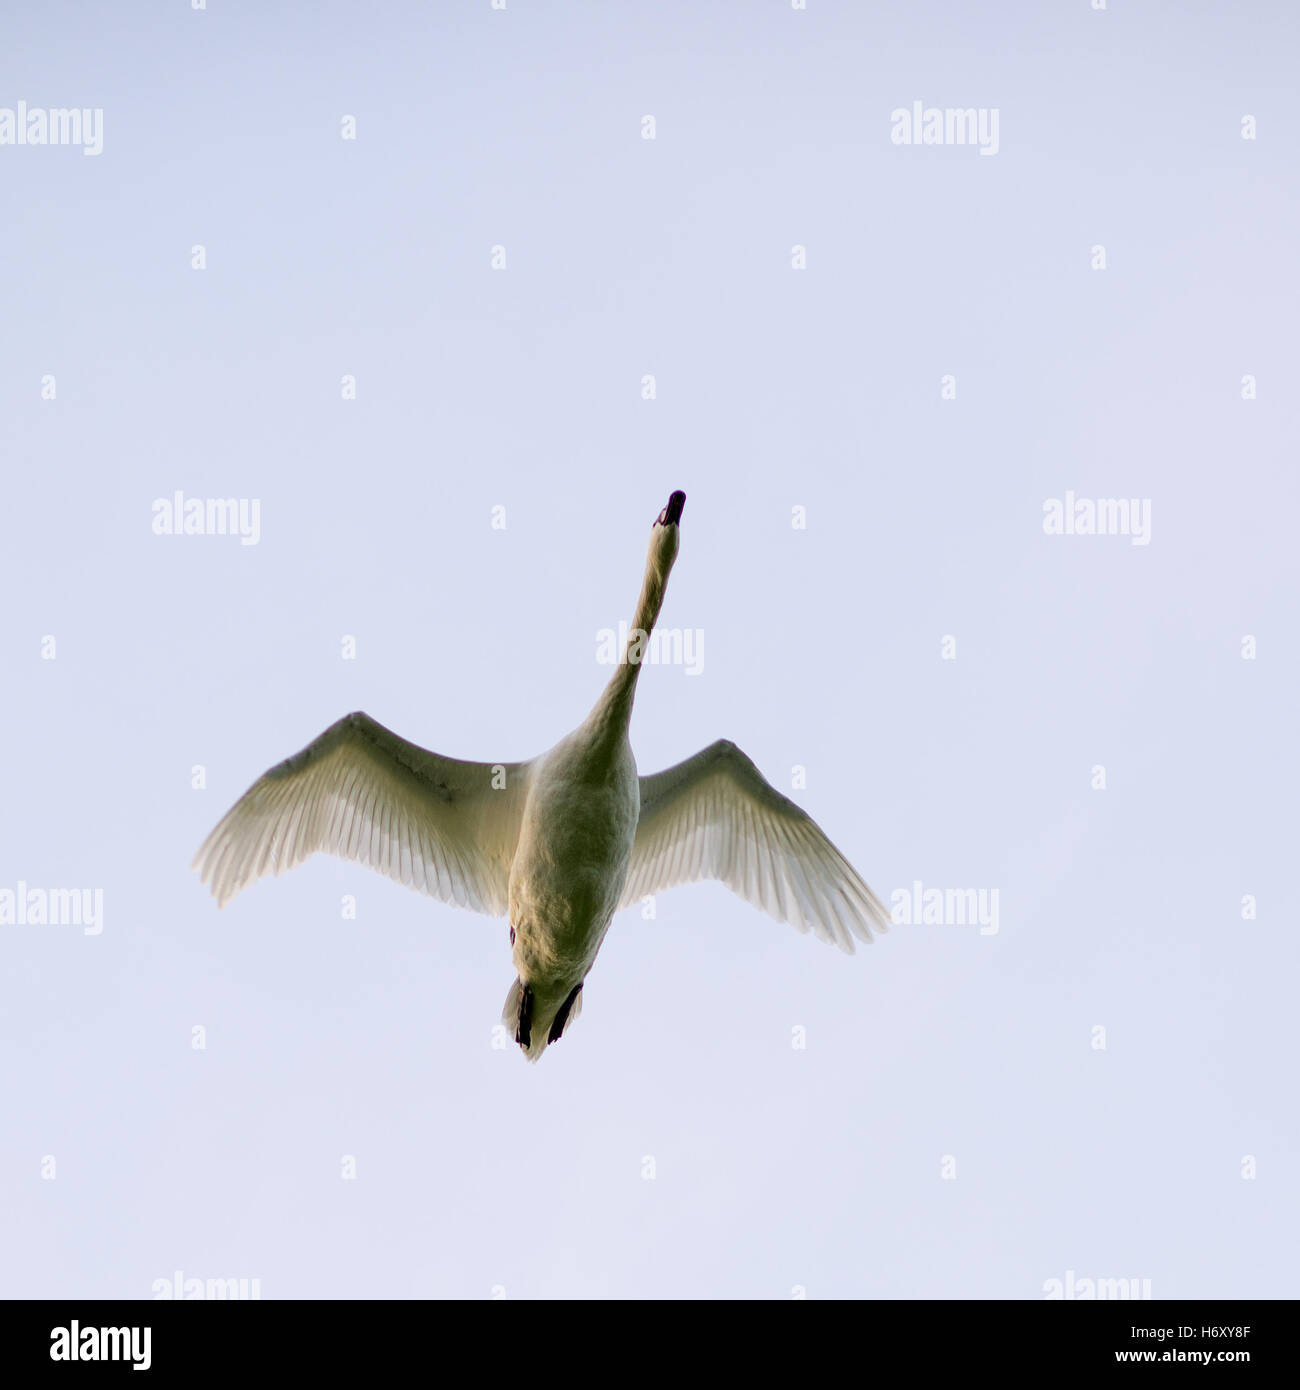 Sticking your neck out. White swan in flight. Stock Photo